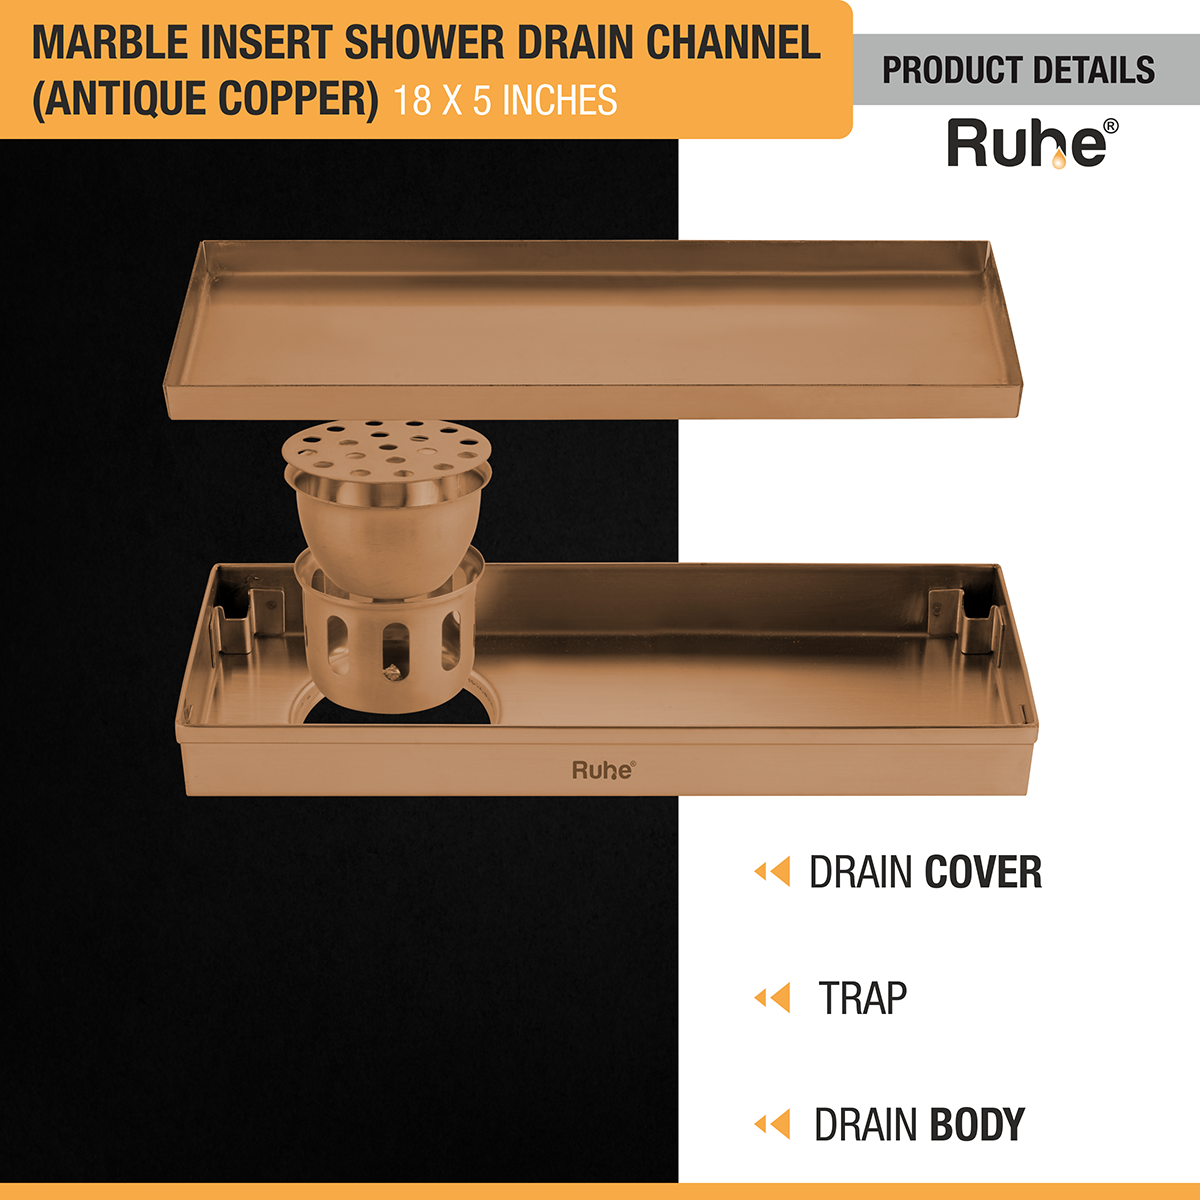 Marble Insert Shower Drain Channel (18 x 5 Inches) ROSE GOLD PVD Coated with drain cover, trap, and drain body